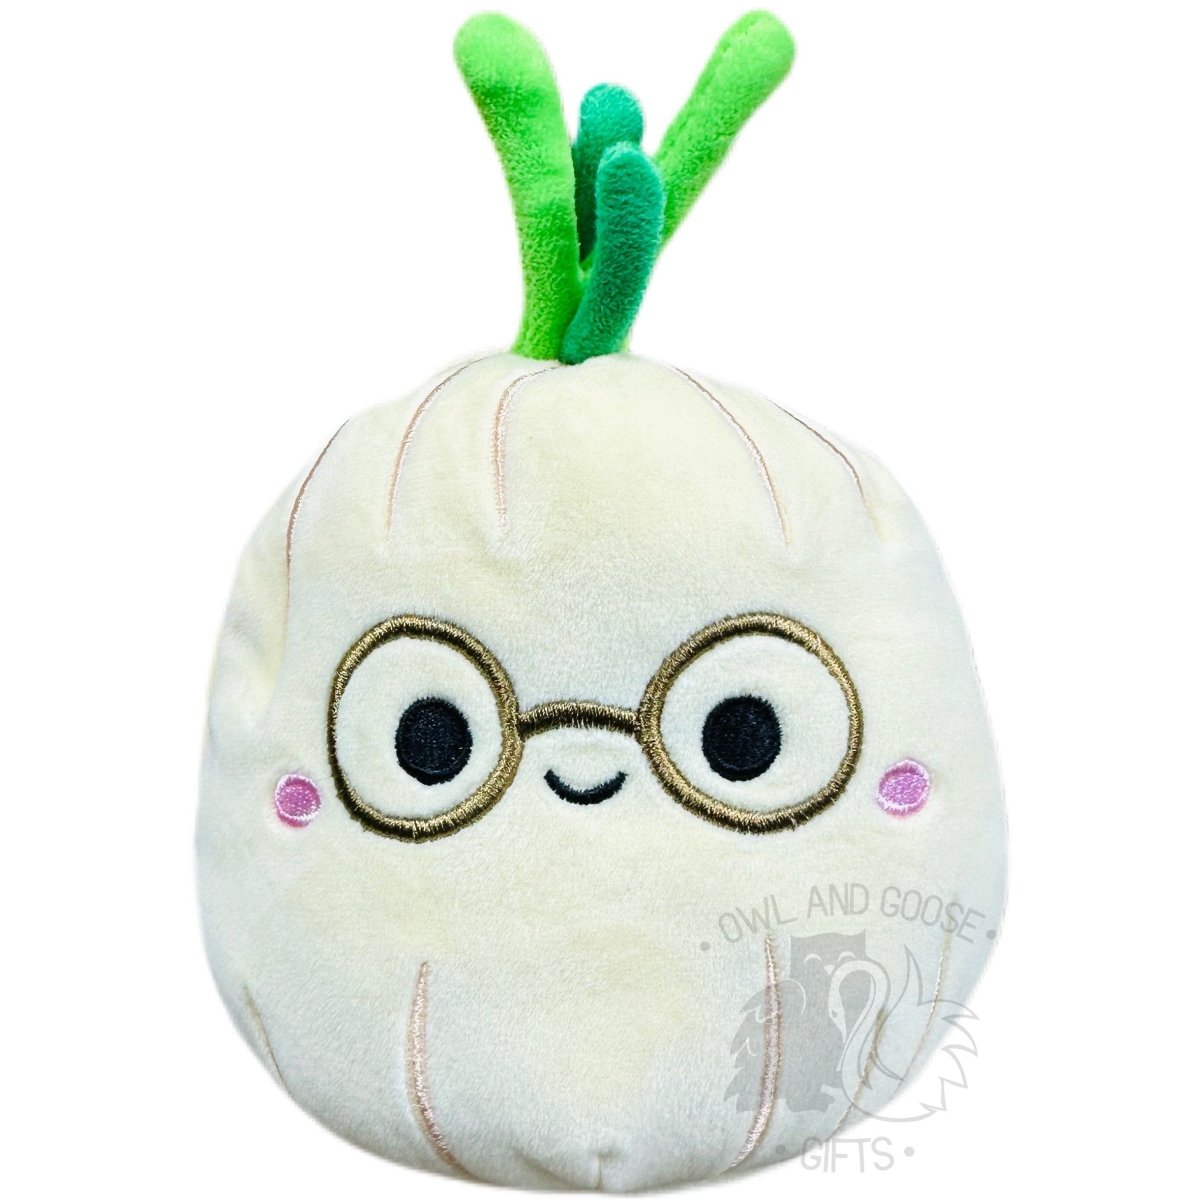 Squishmallow 5 Inch Isolde the Onion Plush Toy